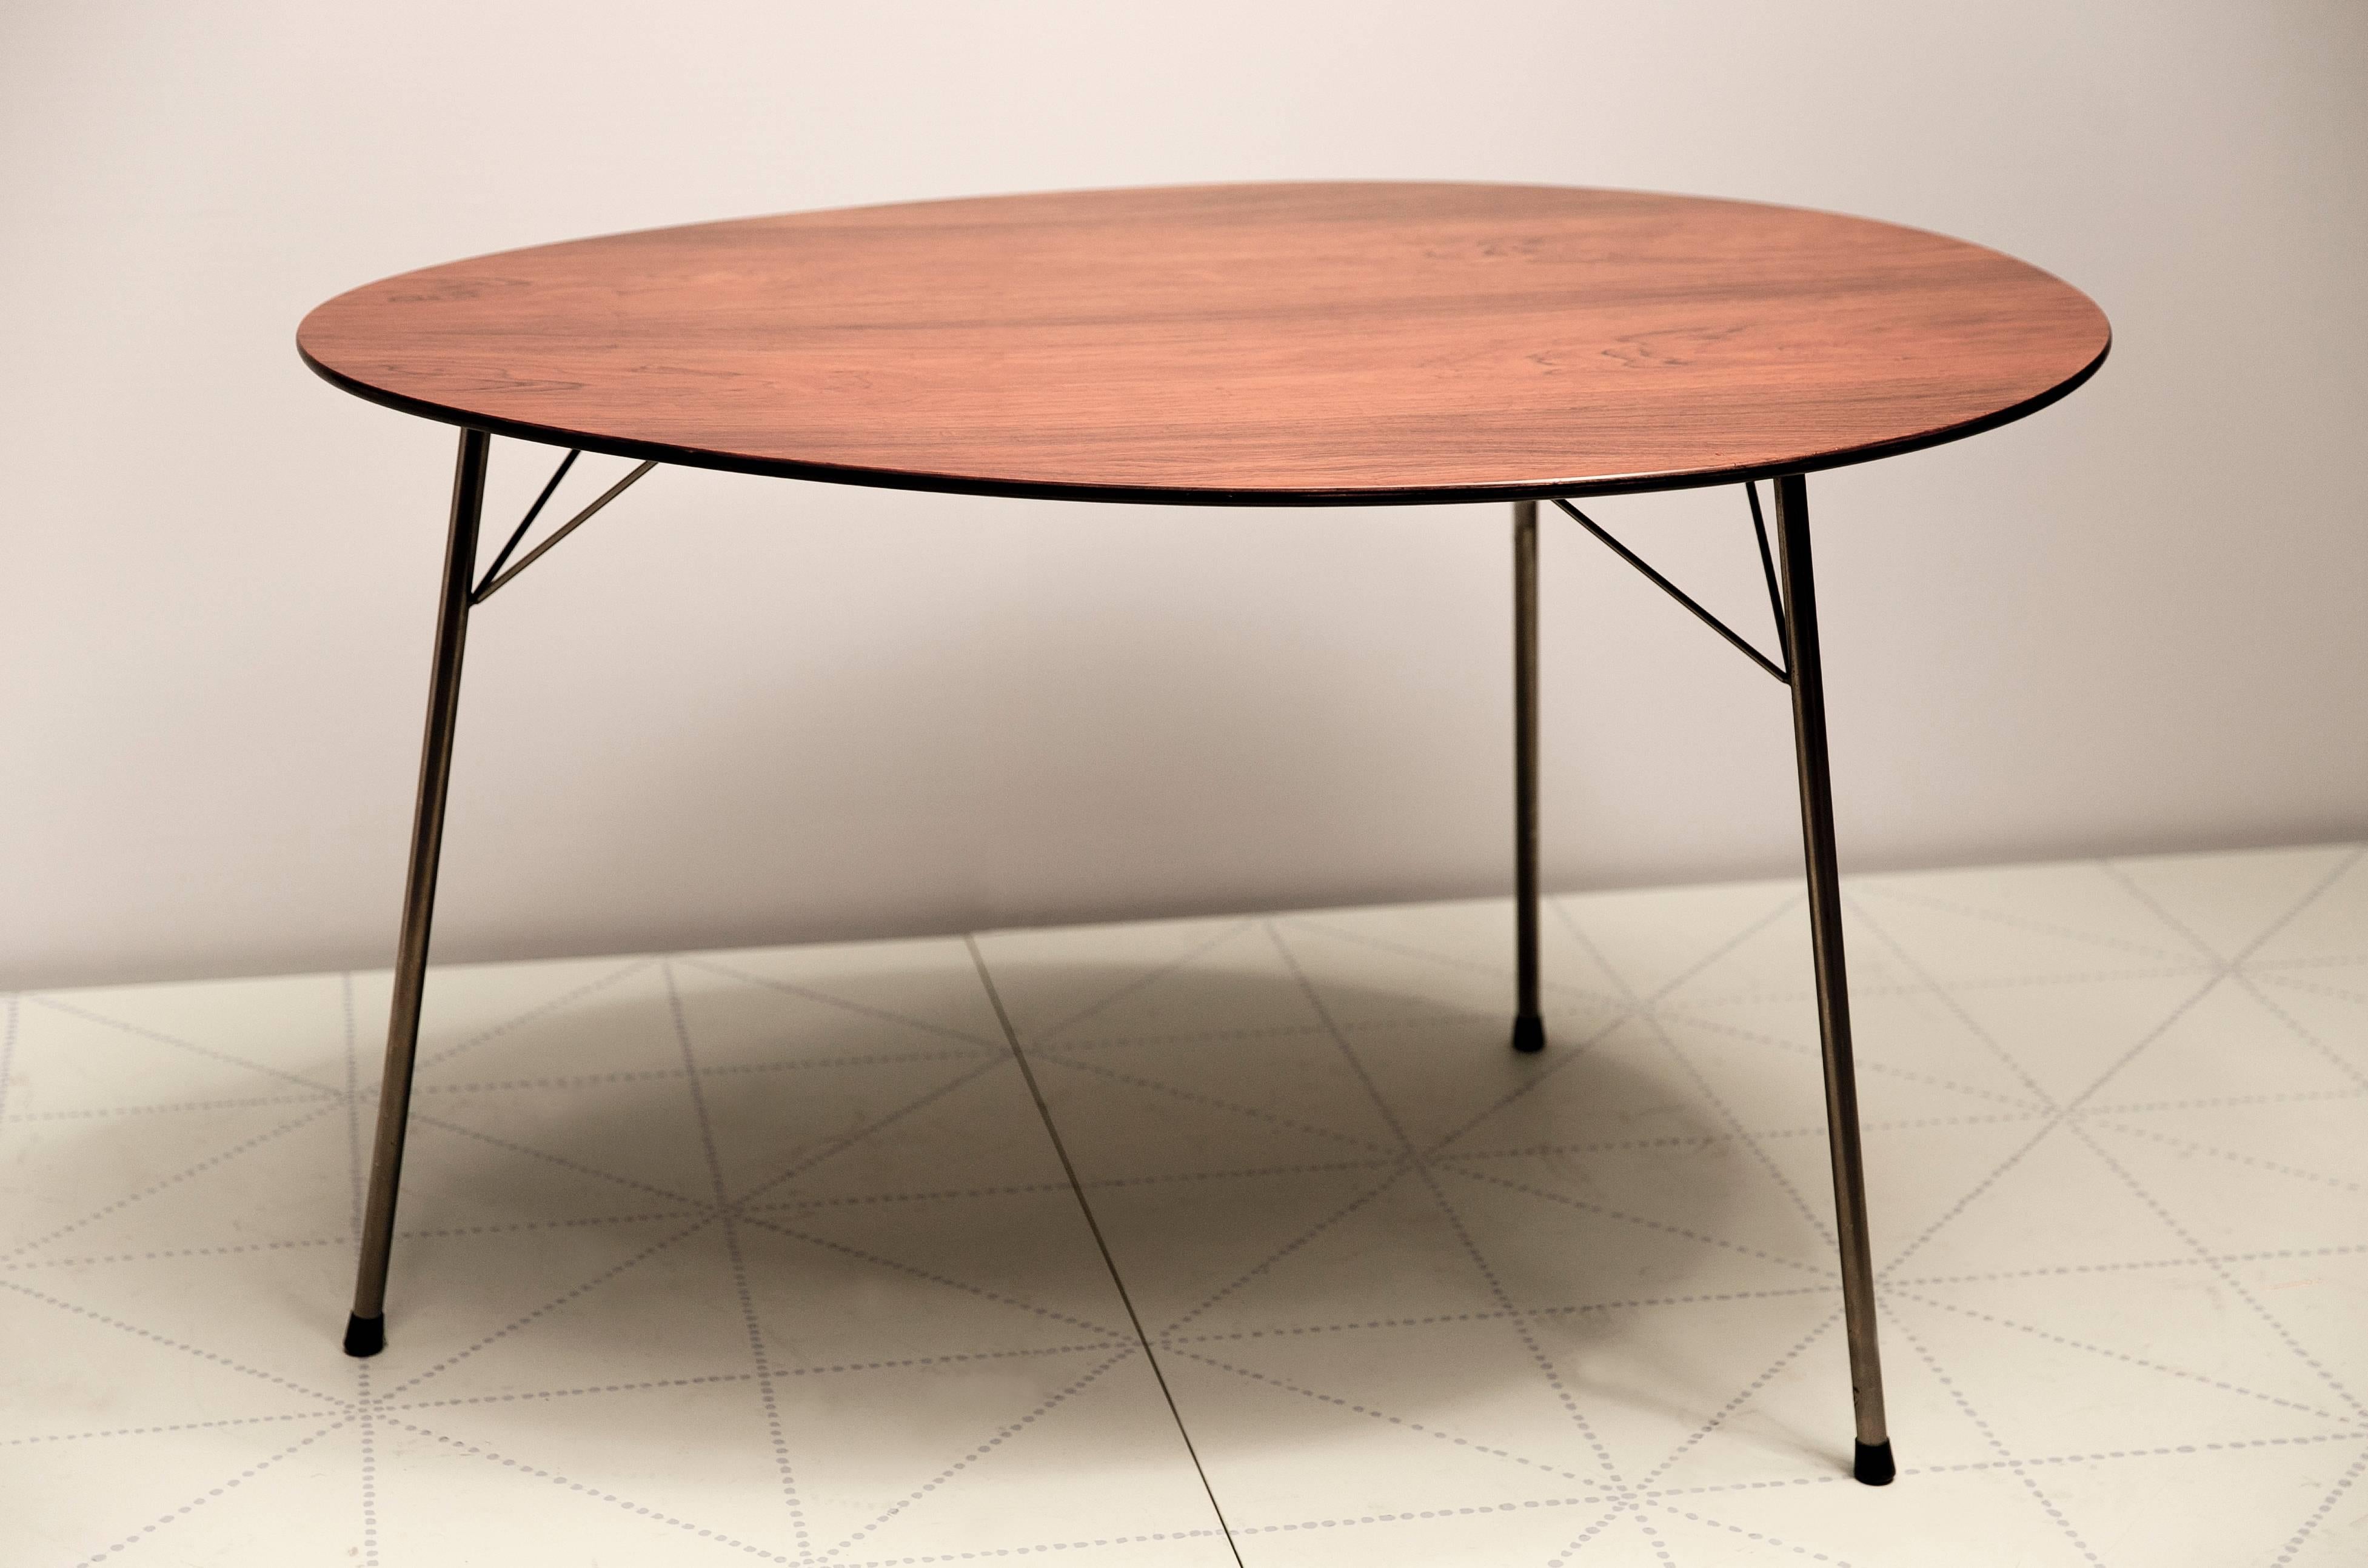 Exceptional Early Brazilian Rosewood Egg Table and Ant Chairs by Arne Jacobsen. Made by Fritz Hansen, the table with maker’s painted logo stamped onto the underside of the wooden top, the chairs with the maker’s logo stamped into the underside of